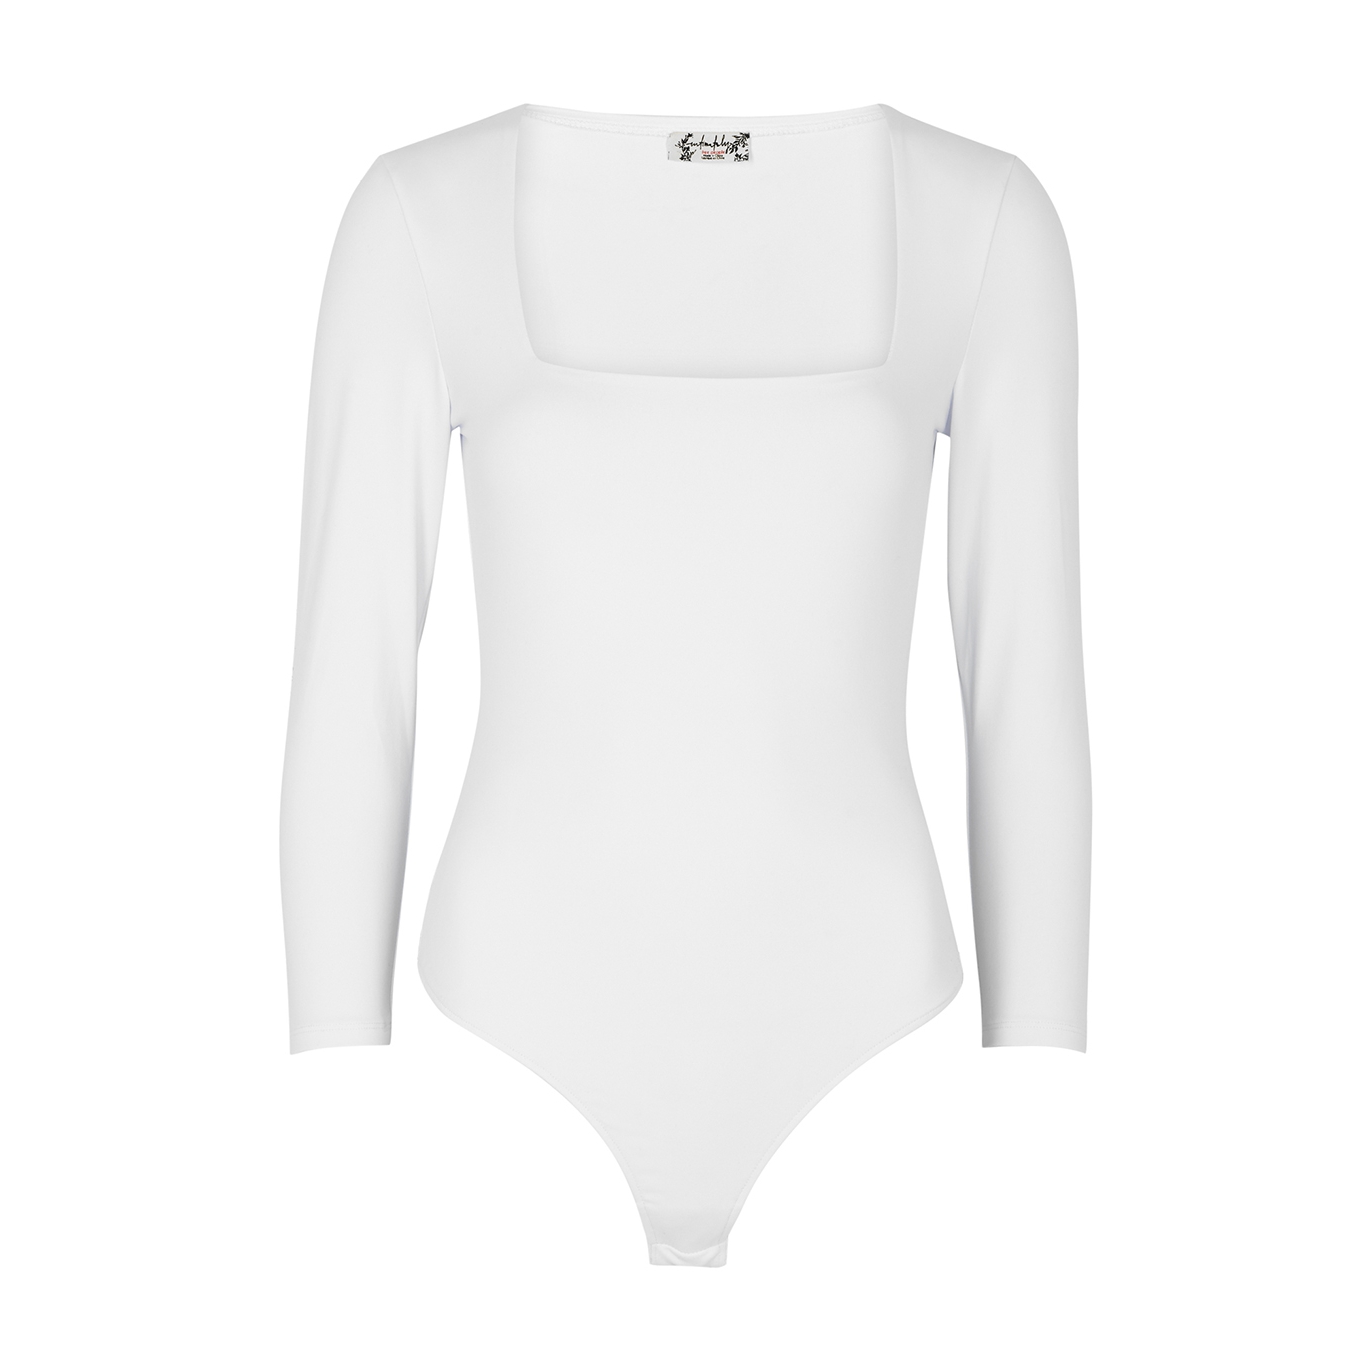 Free People Truth Or Square White Stretch-jersey Bodysuit - XS